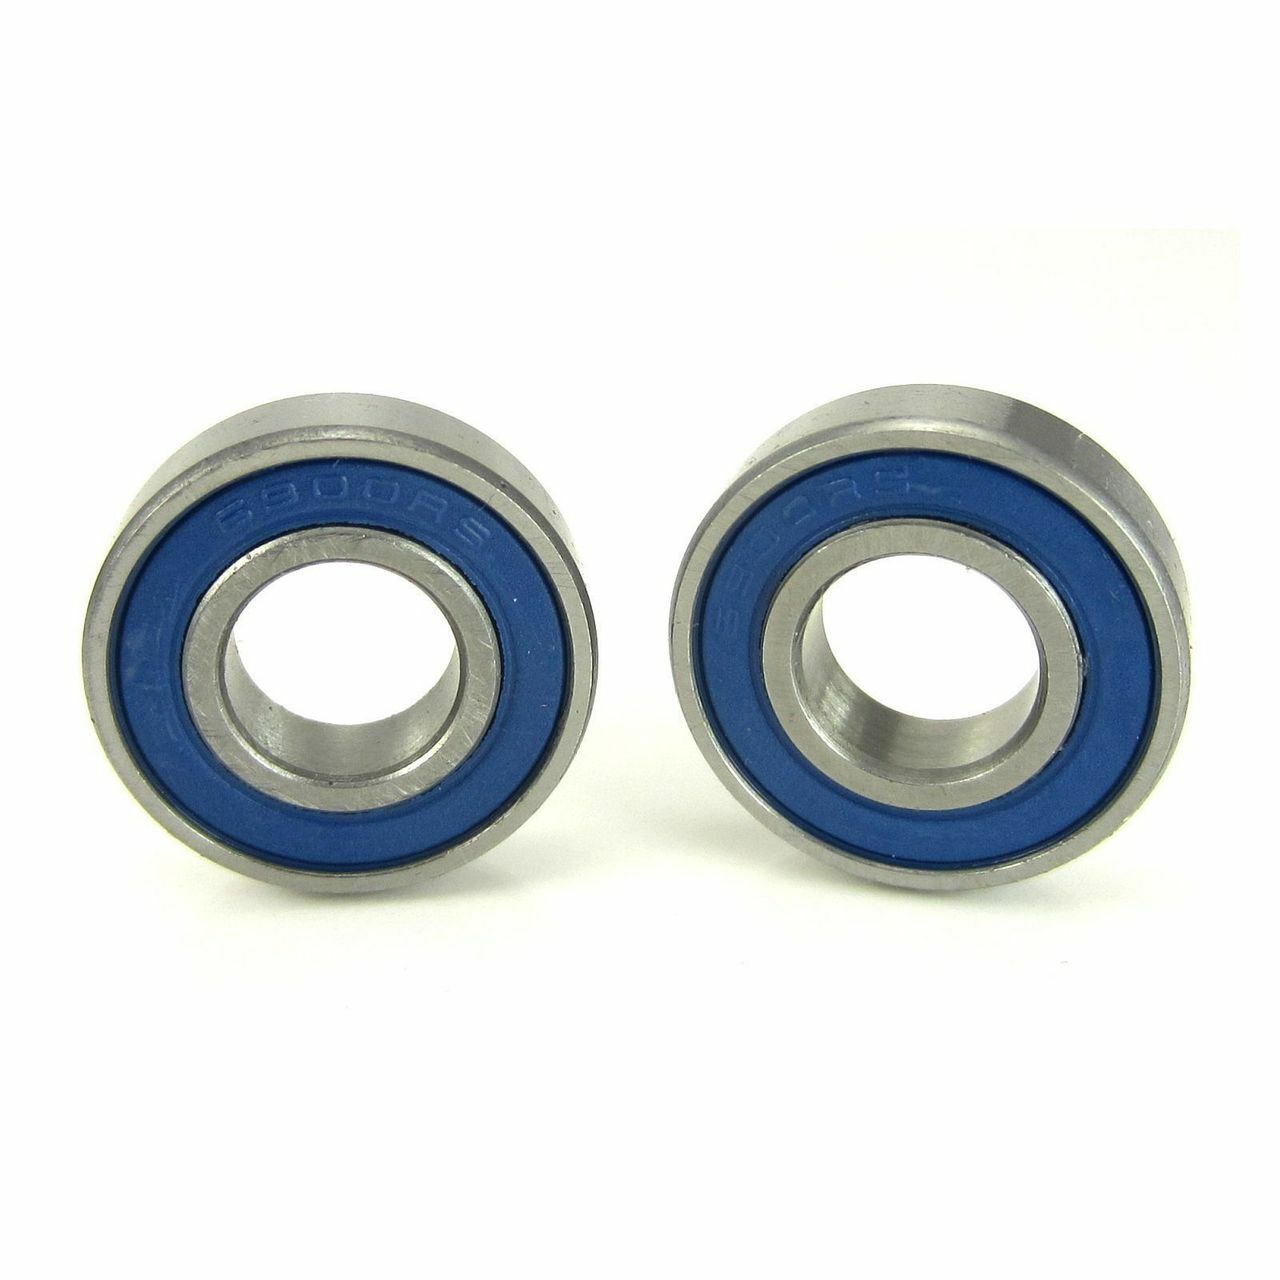 6900-2RS 10x22x6mm Precision High Speed RC Car Ball Bearing, Chrome Steel (GCr15) with Blue Rubber Seals ABEC-1 ABEC-3 ABEC-5